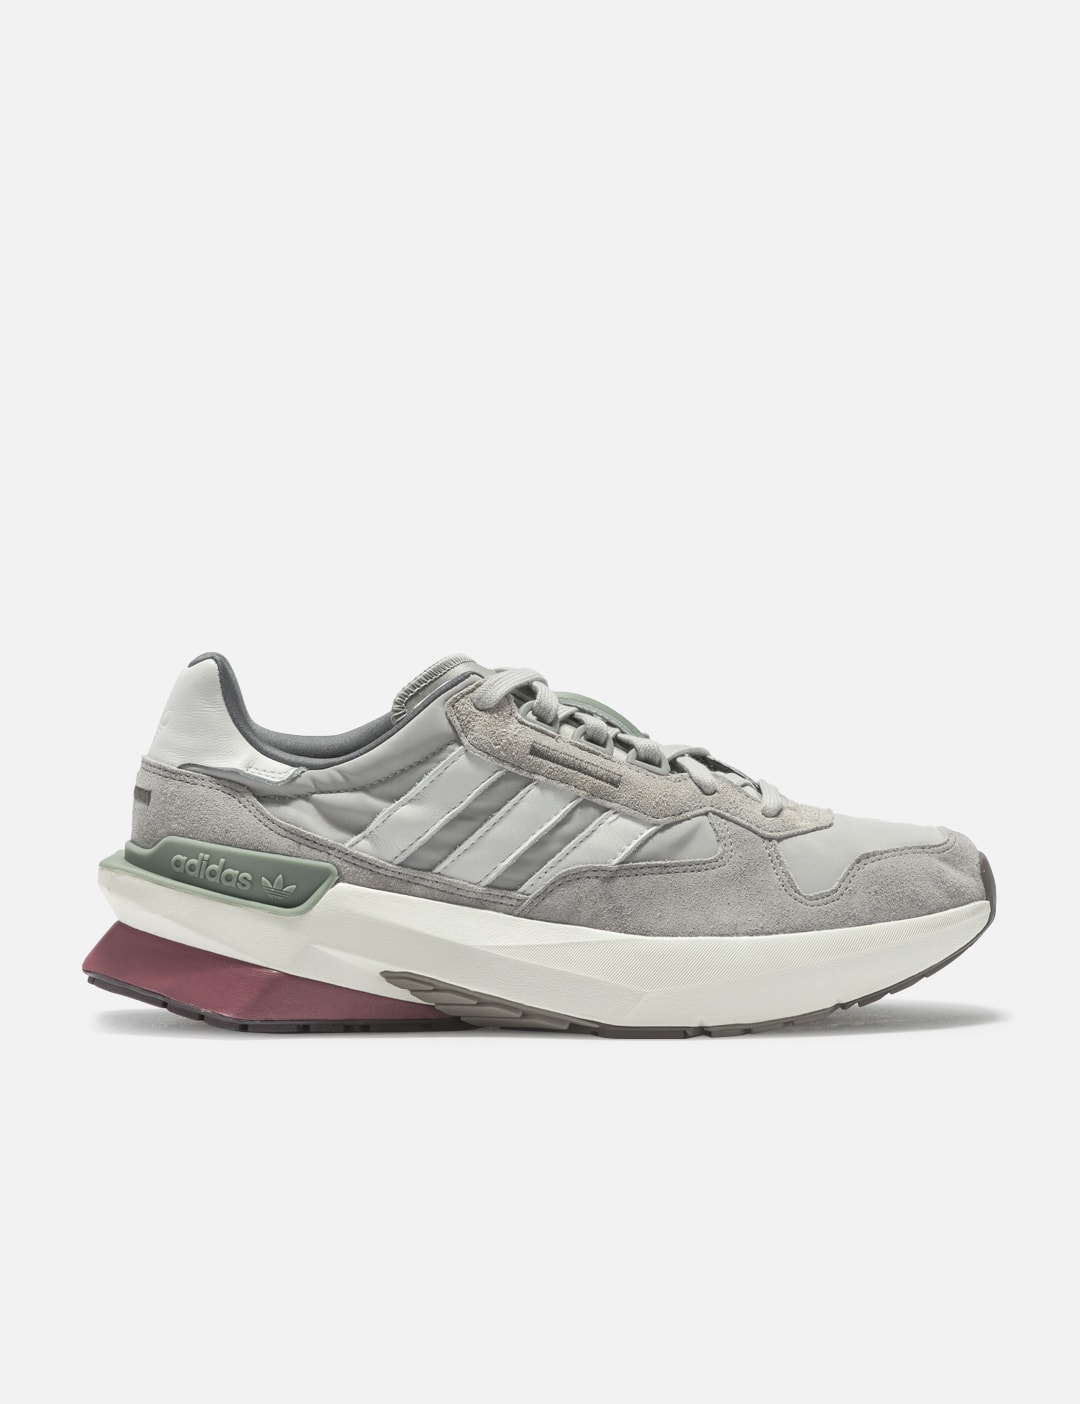 Adidas Originals - Treziod PT | HBX - Globally Curated Fashion and  Lifestyle by Hypebeast | Sneaker